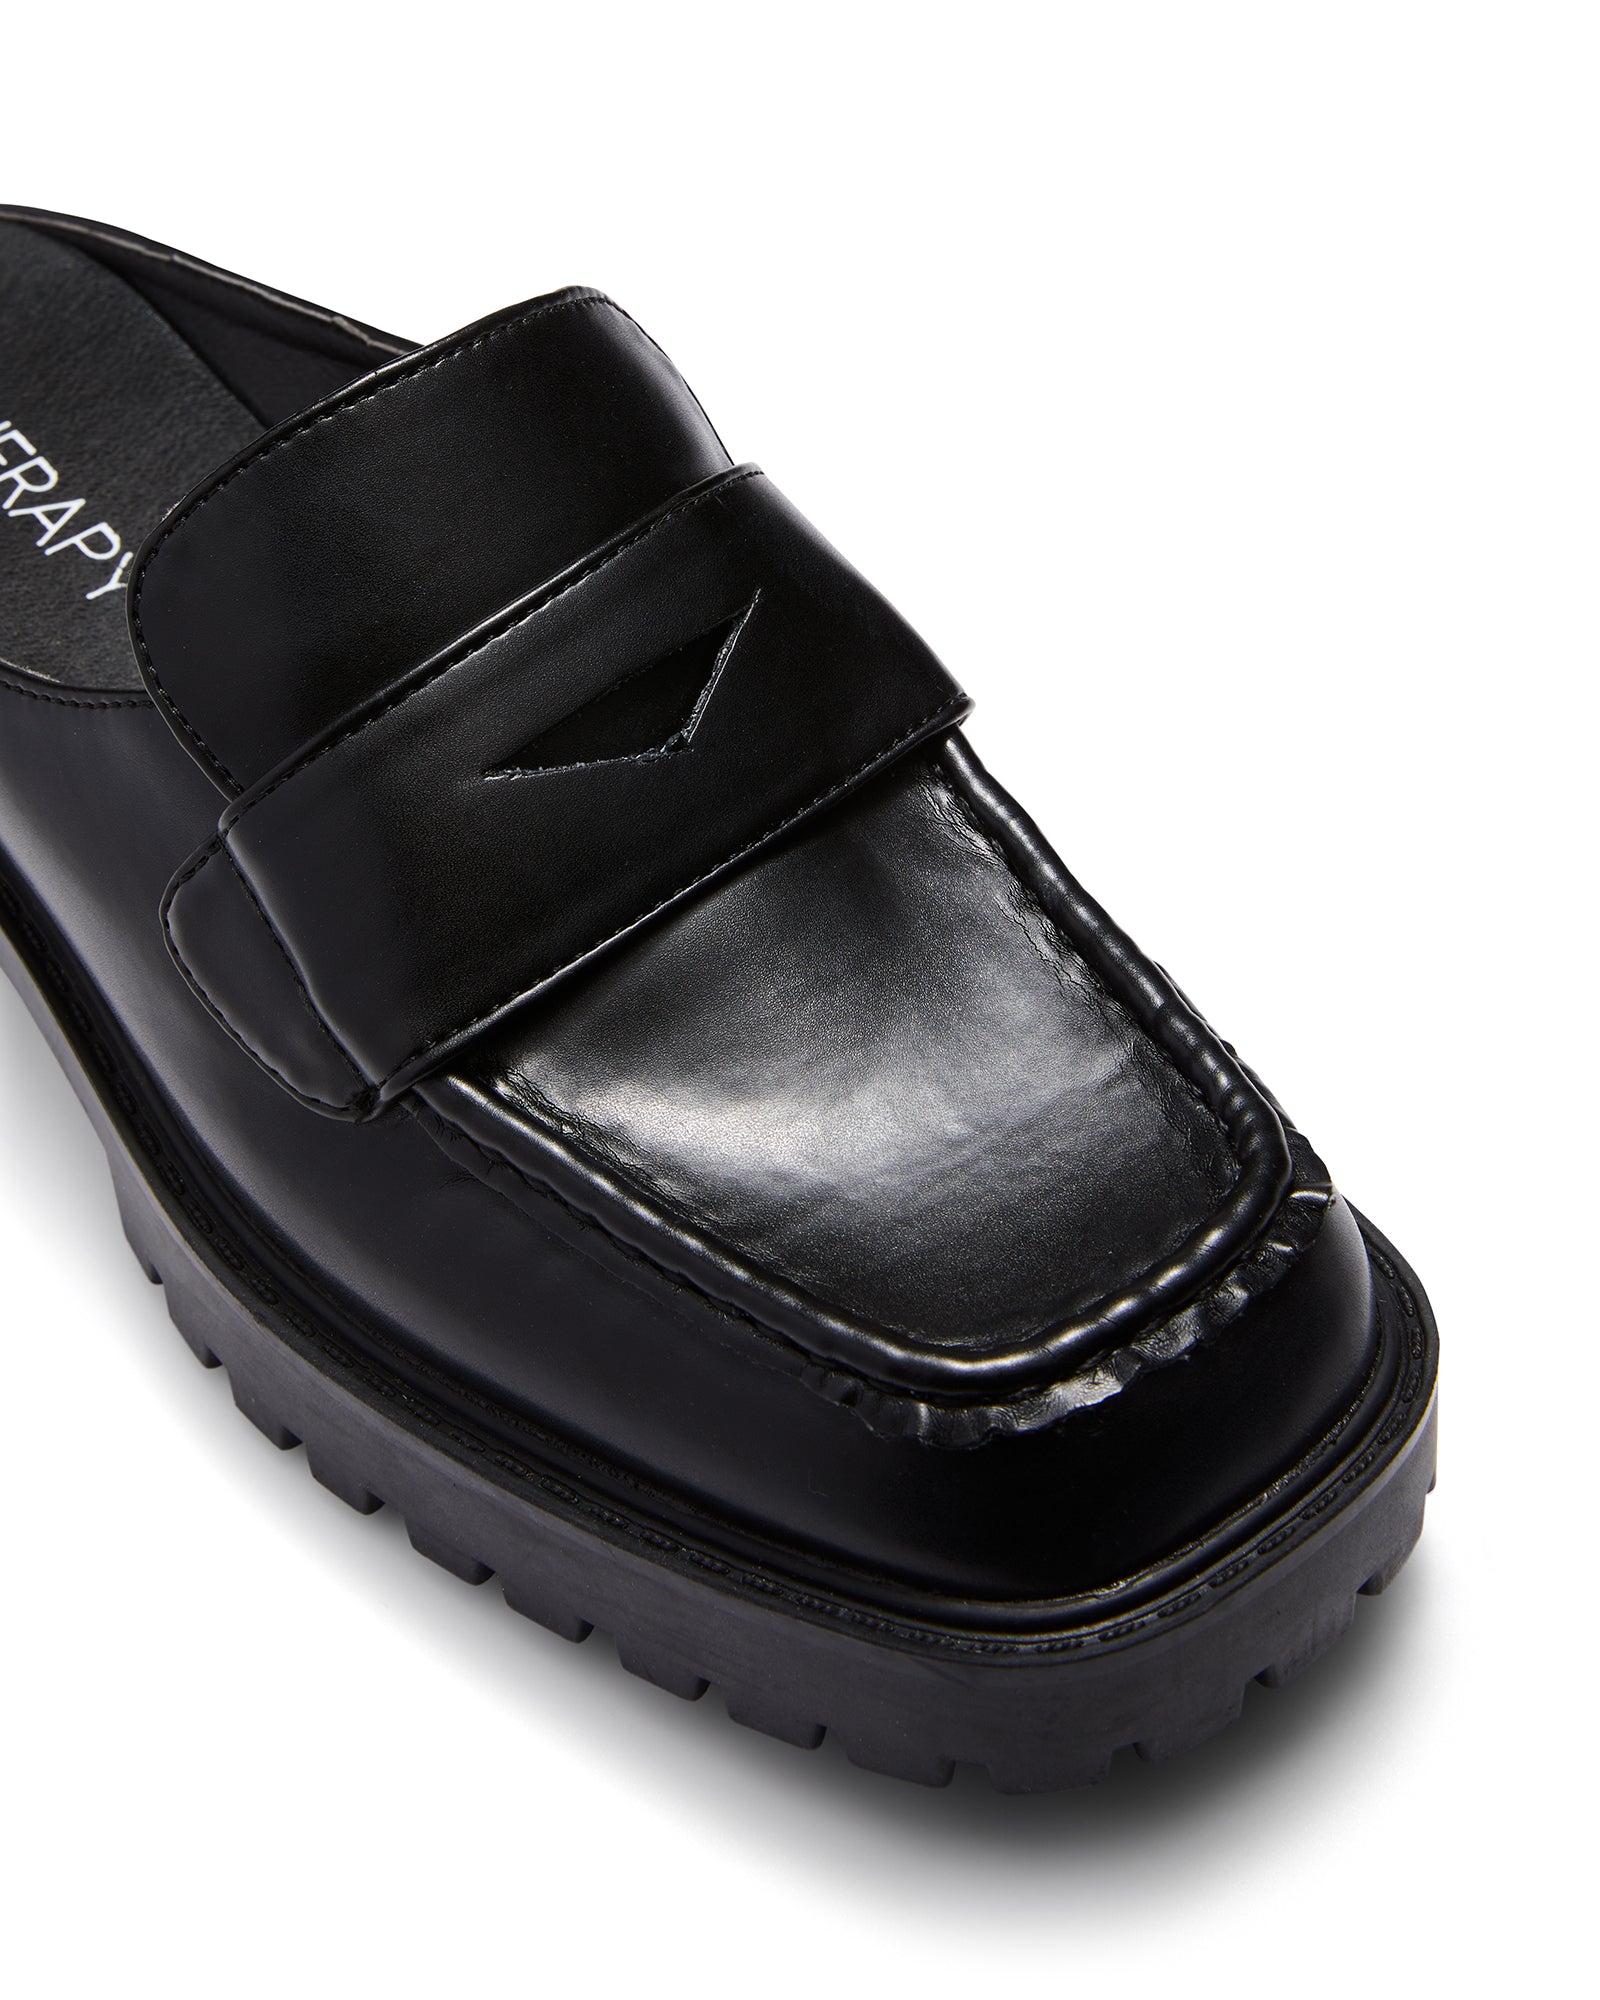 Therapy Shoes Royal Black Smooth | Women's Loafers | Flats | Square Toe